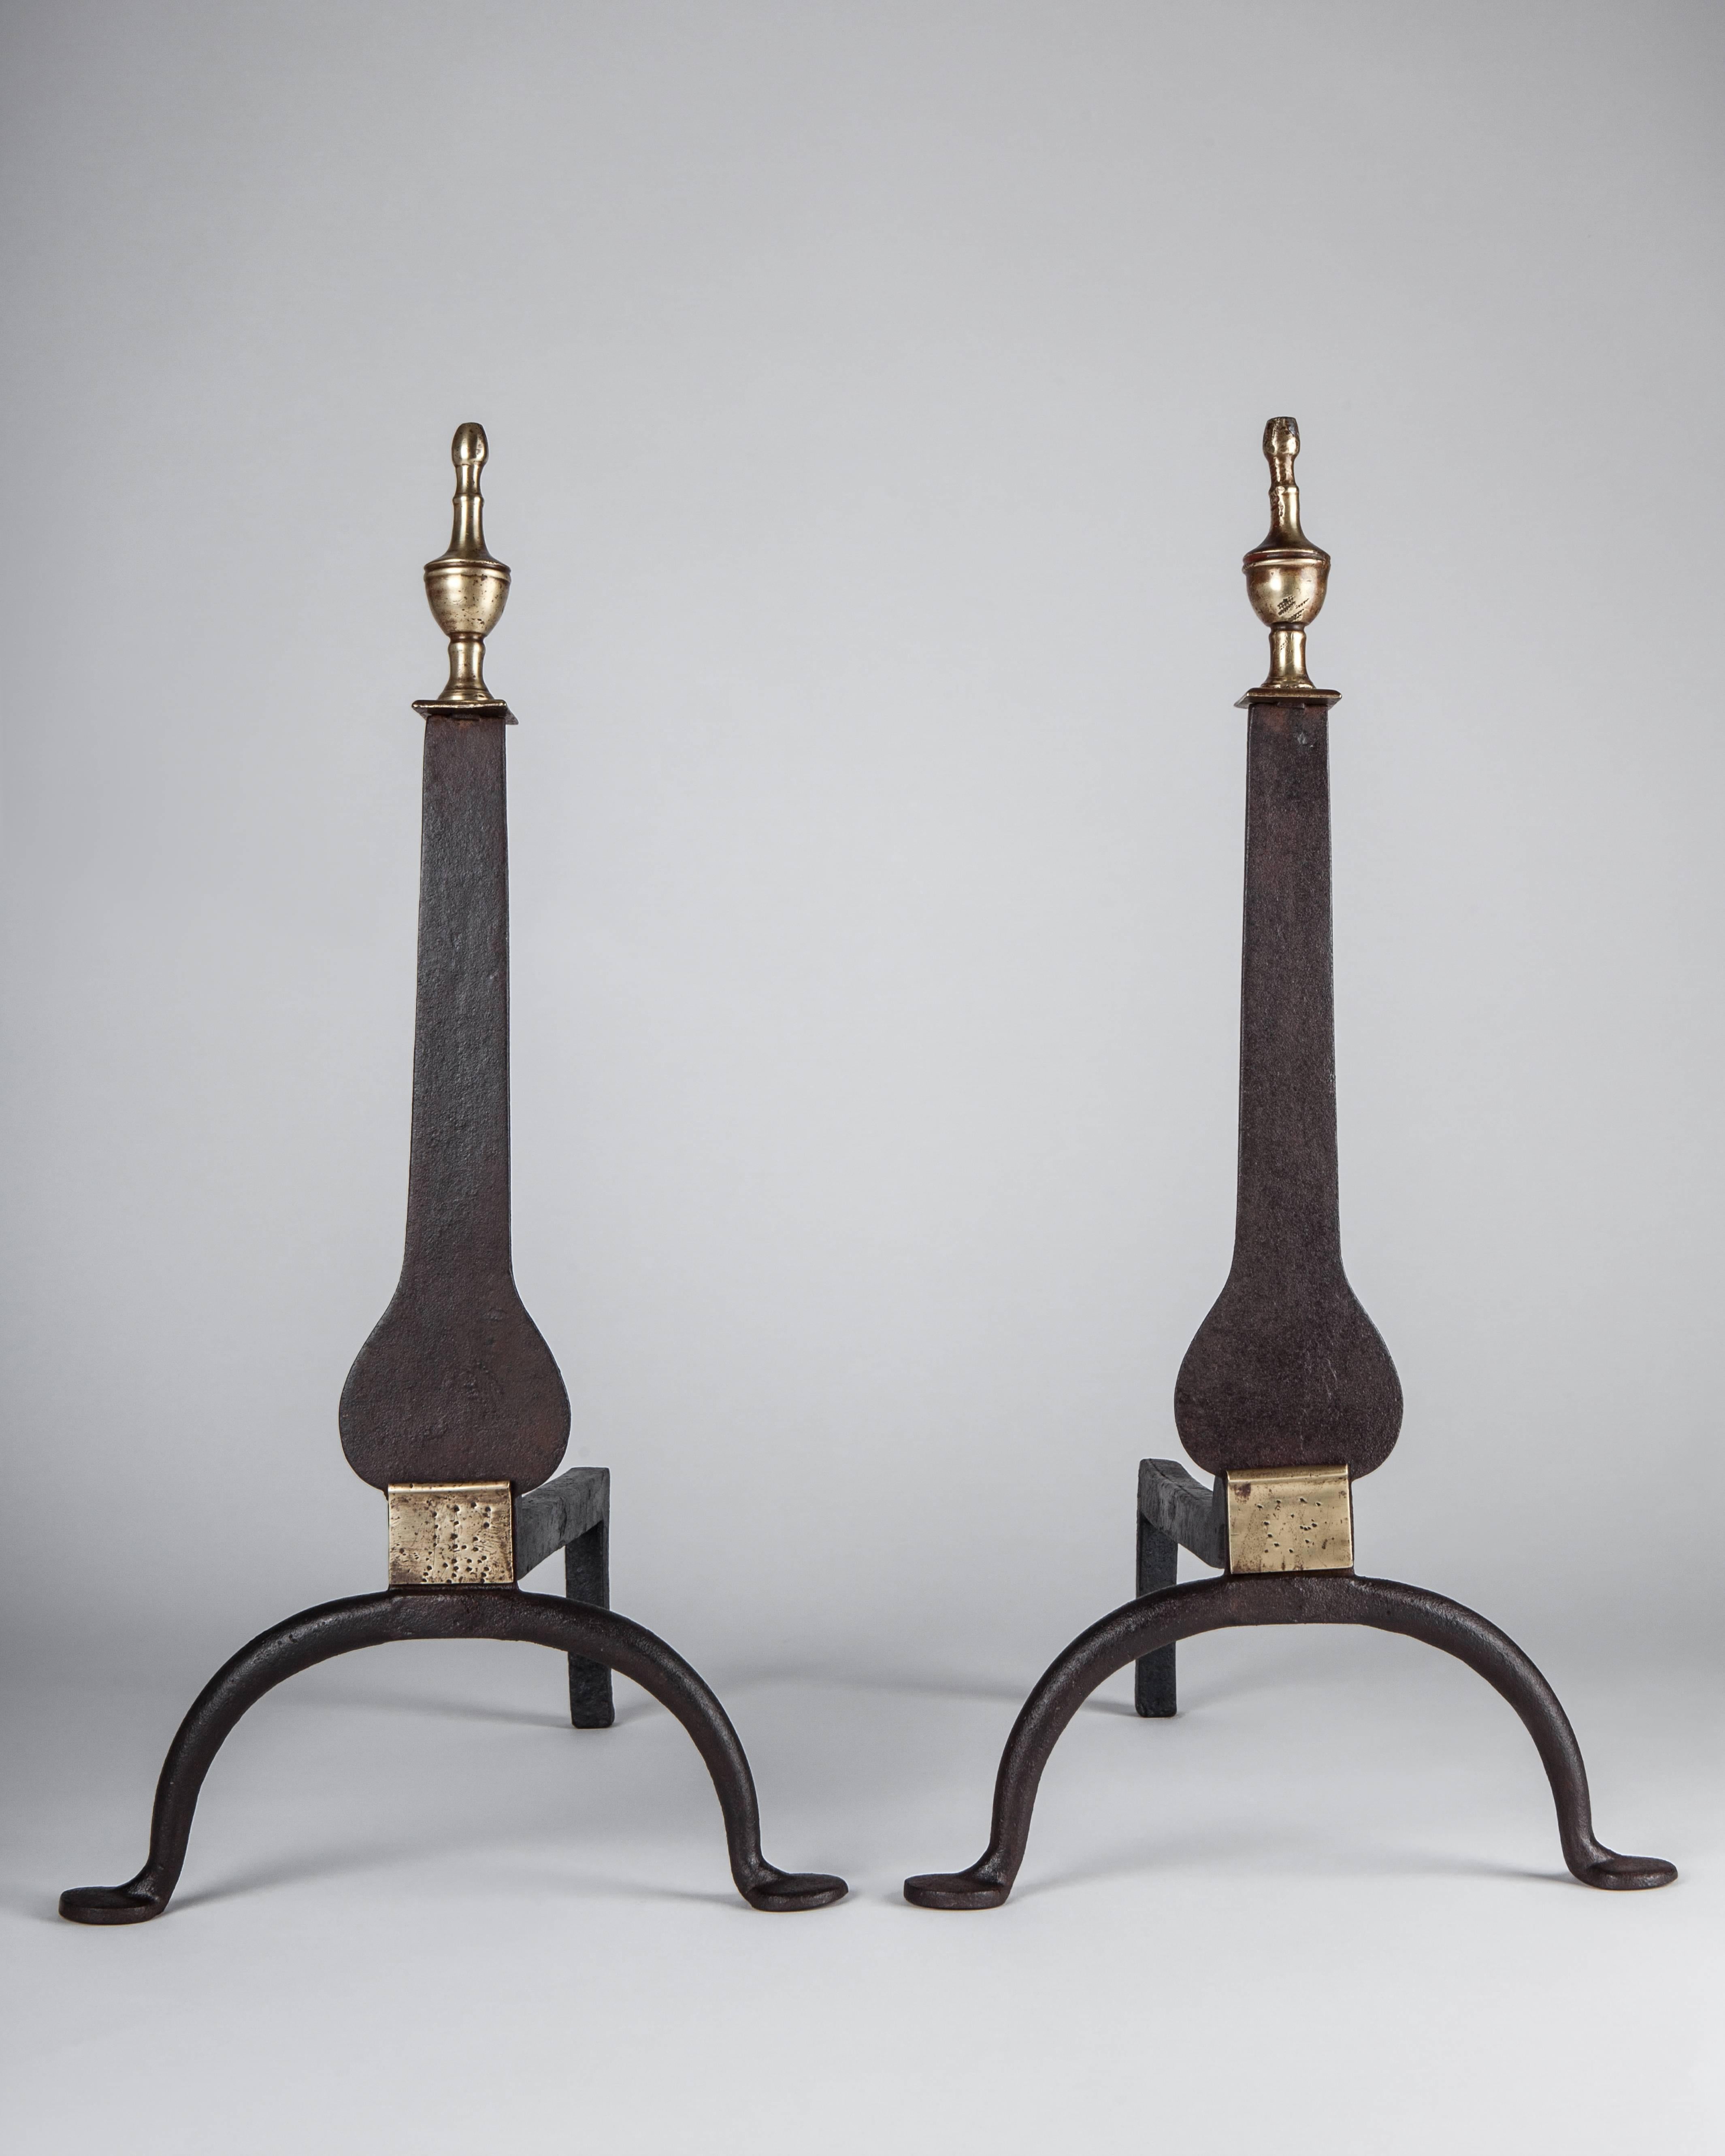 AFP0539
A pair of antique 18th century style wrought iron andirons with full round brass details atop knife blade bodies, circa 1900s.

Dimensions:
Overall: 22